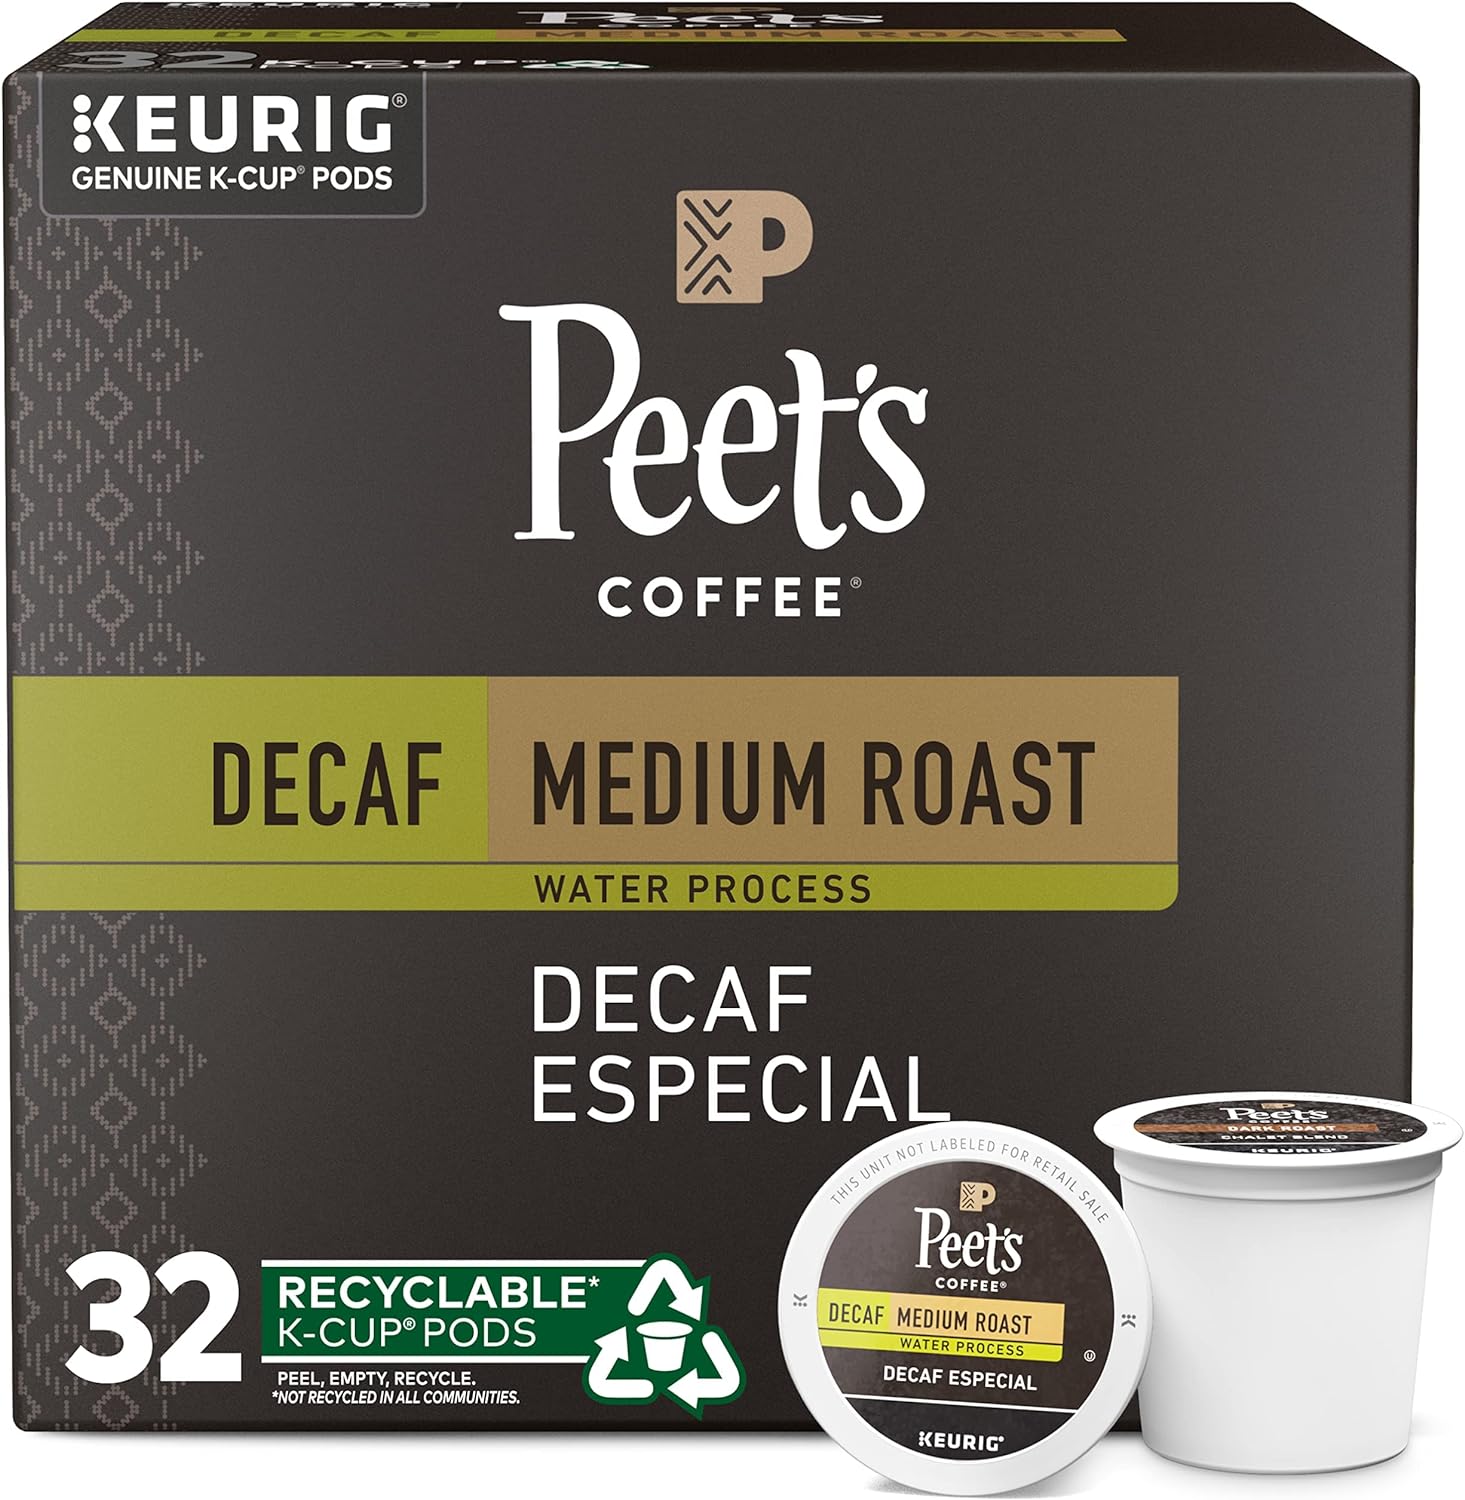 Peet's Coffee, Medium Roast Decaffeinated Coffee K-Cup Pods for Keurig Brewers - Decaf Especial 32 Count (1 Box of 32 K-Cup Pods)